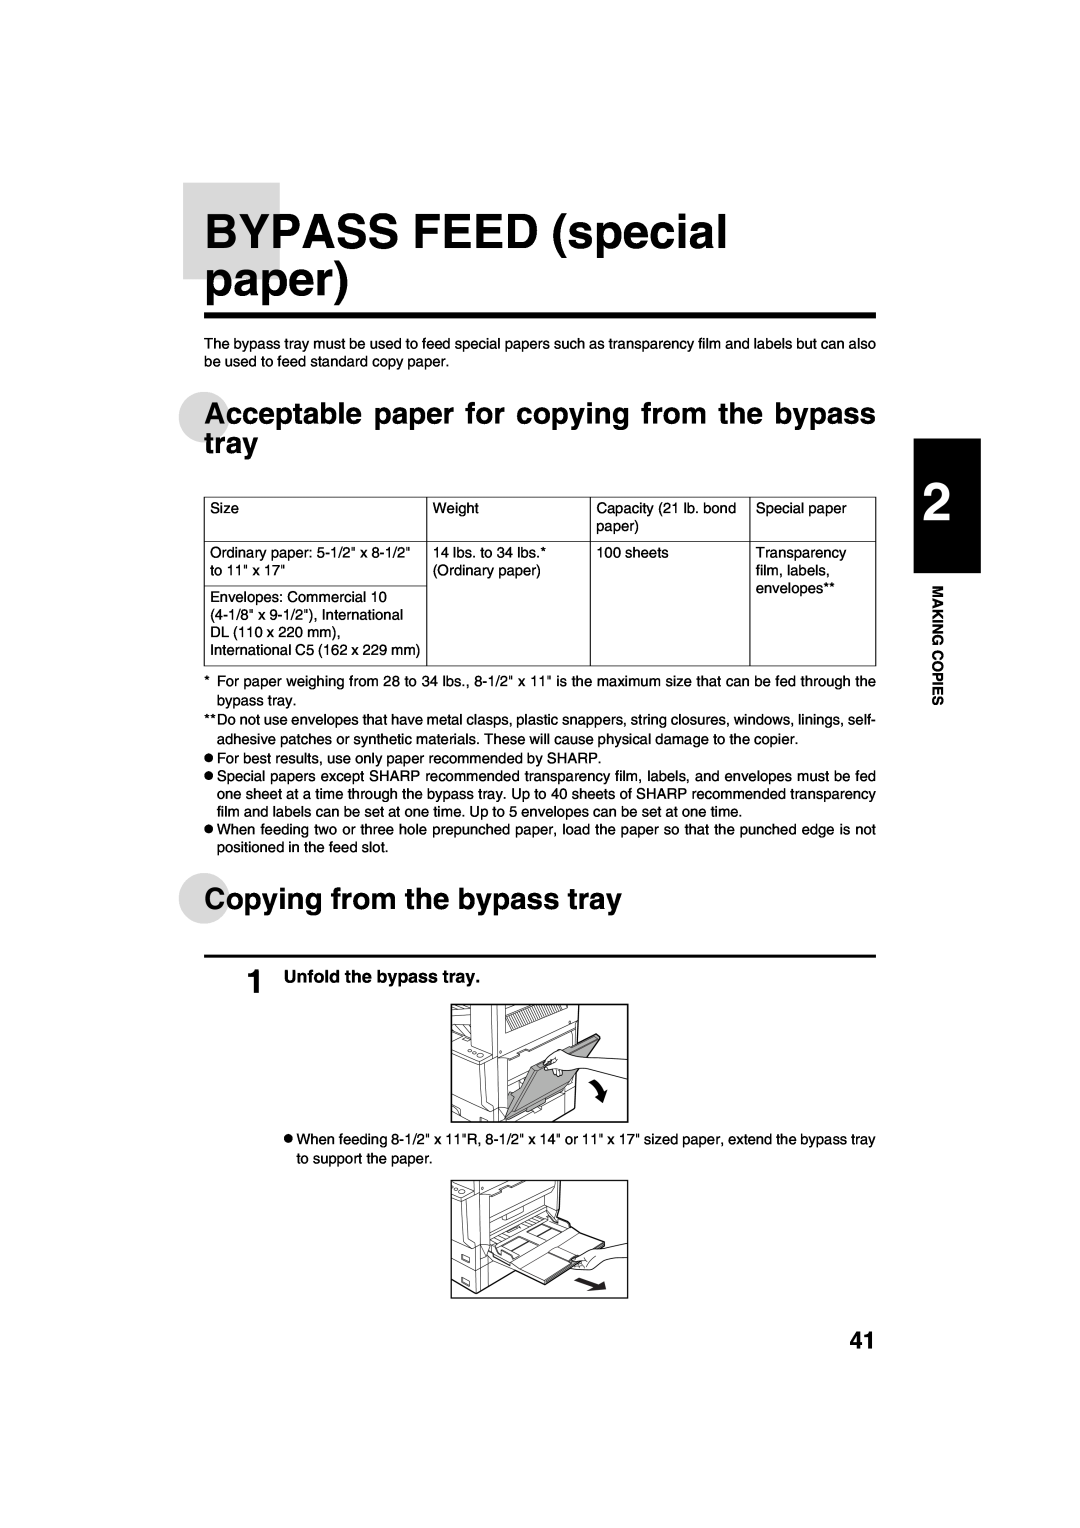 Sharp AR-M208 BYPASS FEED special paper, Acceptable paper for copying from the bypass tray, Copying from the bypass tray 